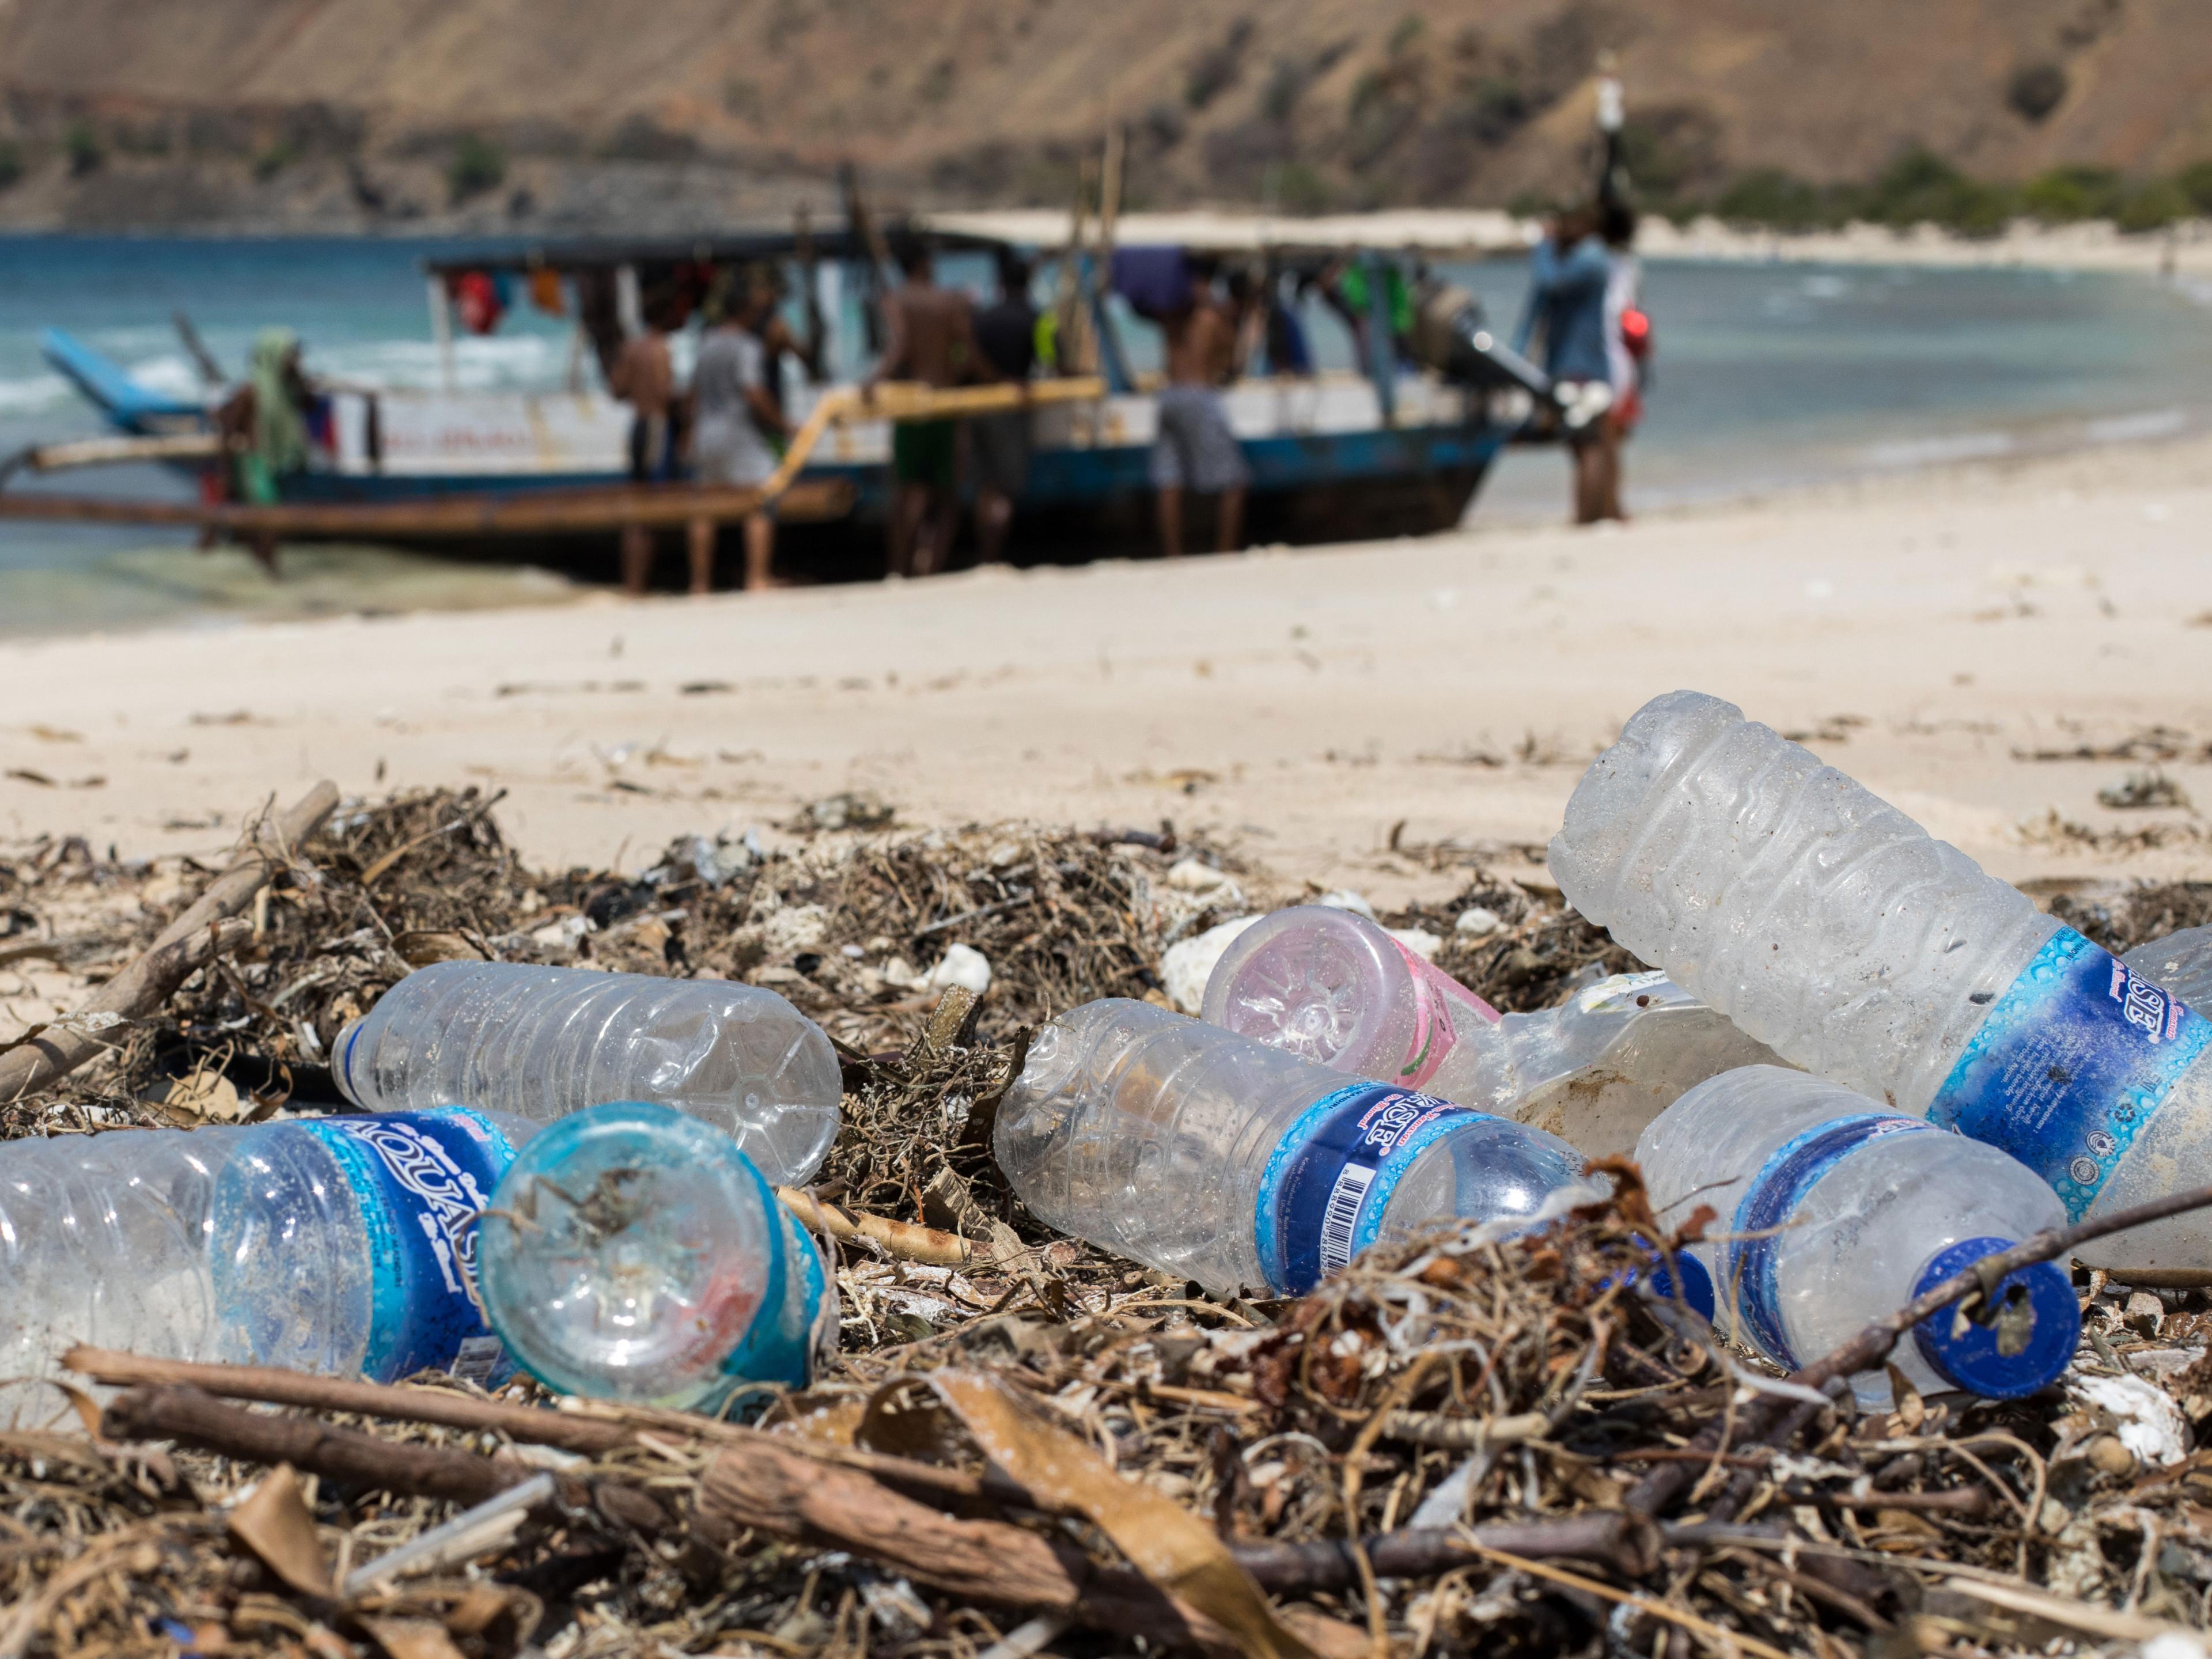 #EUBeachCleanup campaign in East Timor